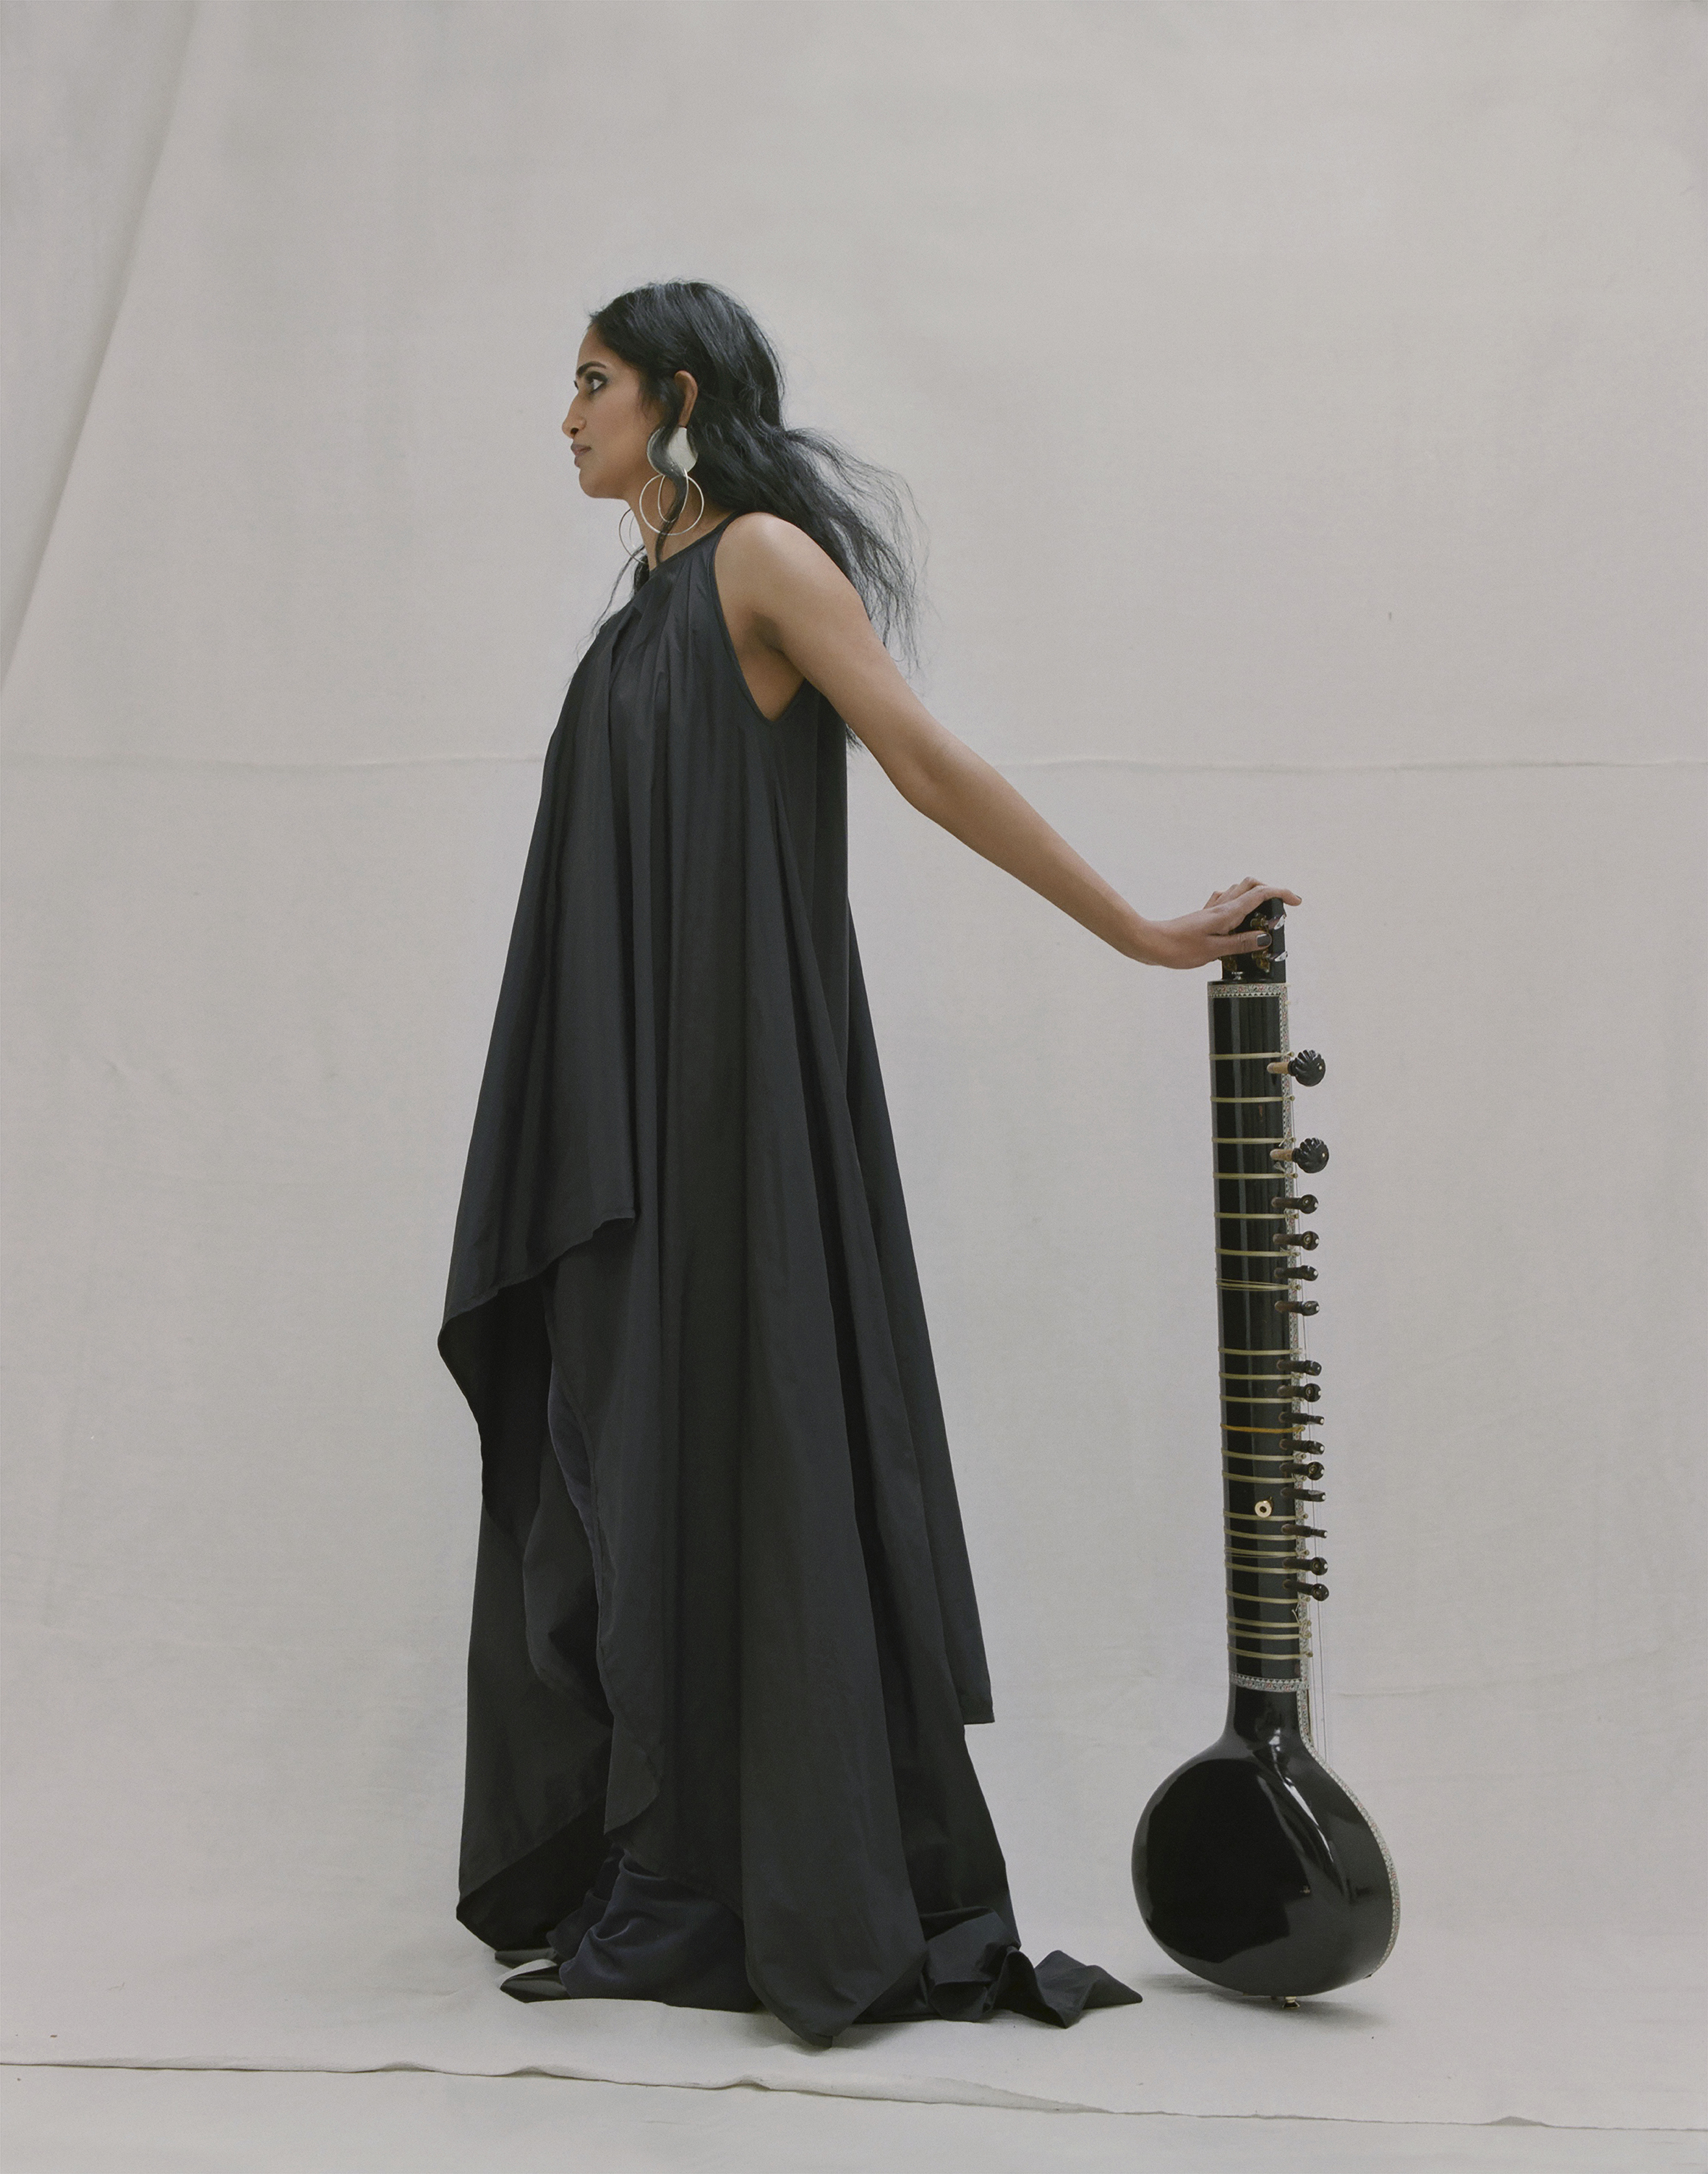  Asymmetrical long dress and trousers MICHAEL OLESTAD,&nbsp;black leather shoes PACO RABANNE,&nbsp;earrings ANNIE COSTELLO BROWN. 